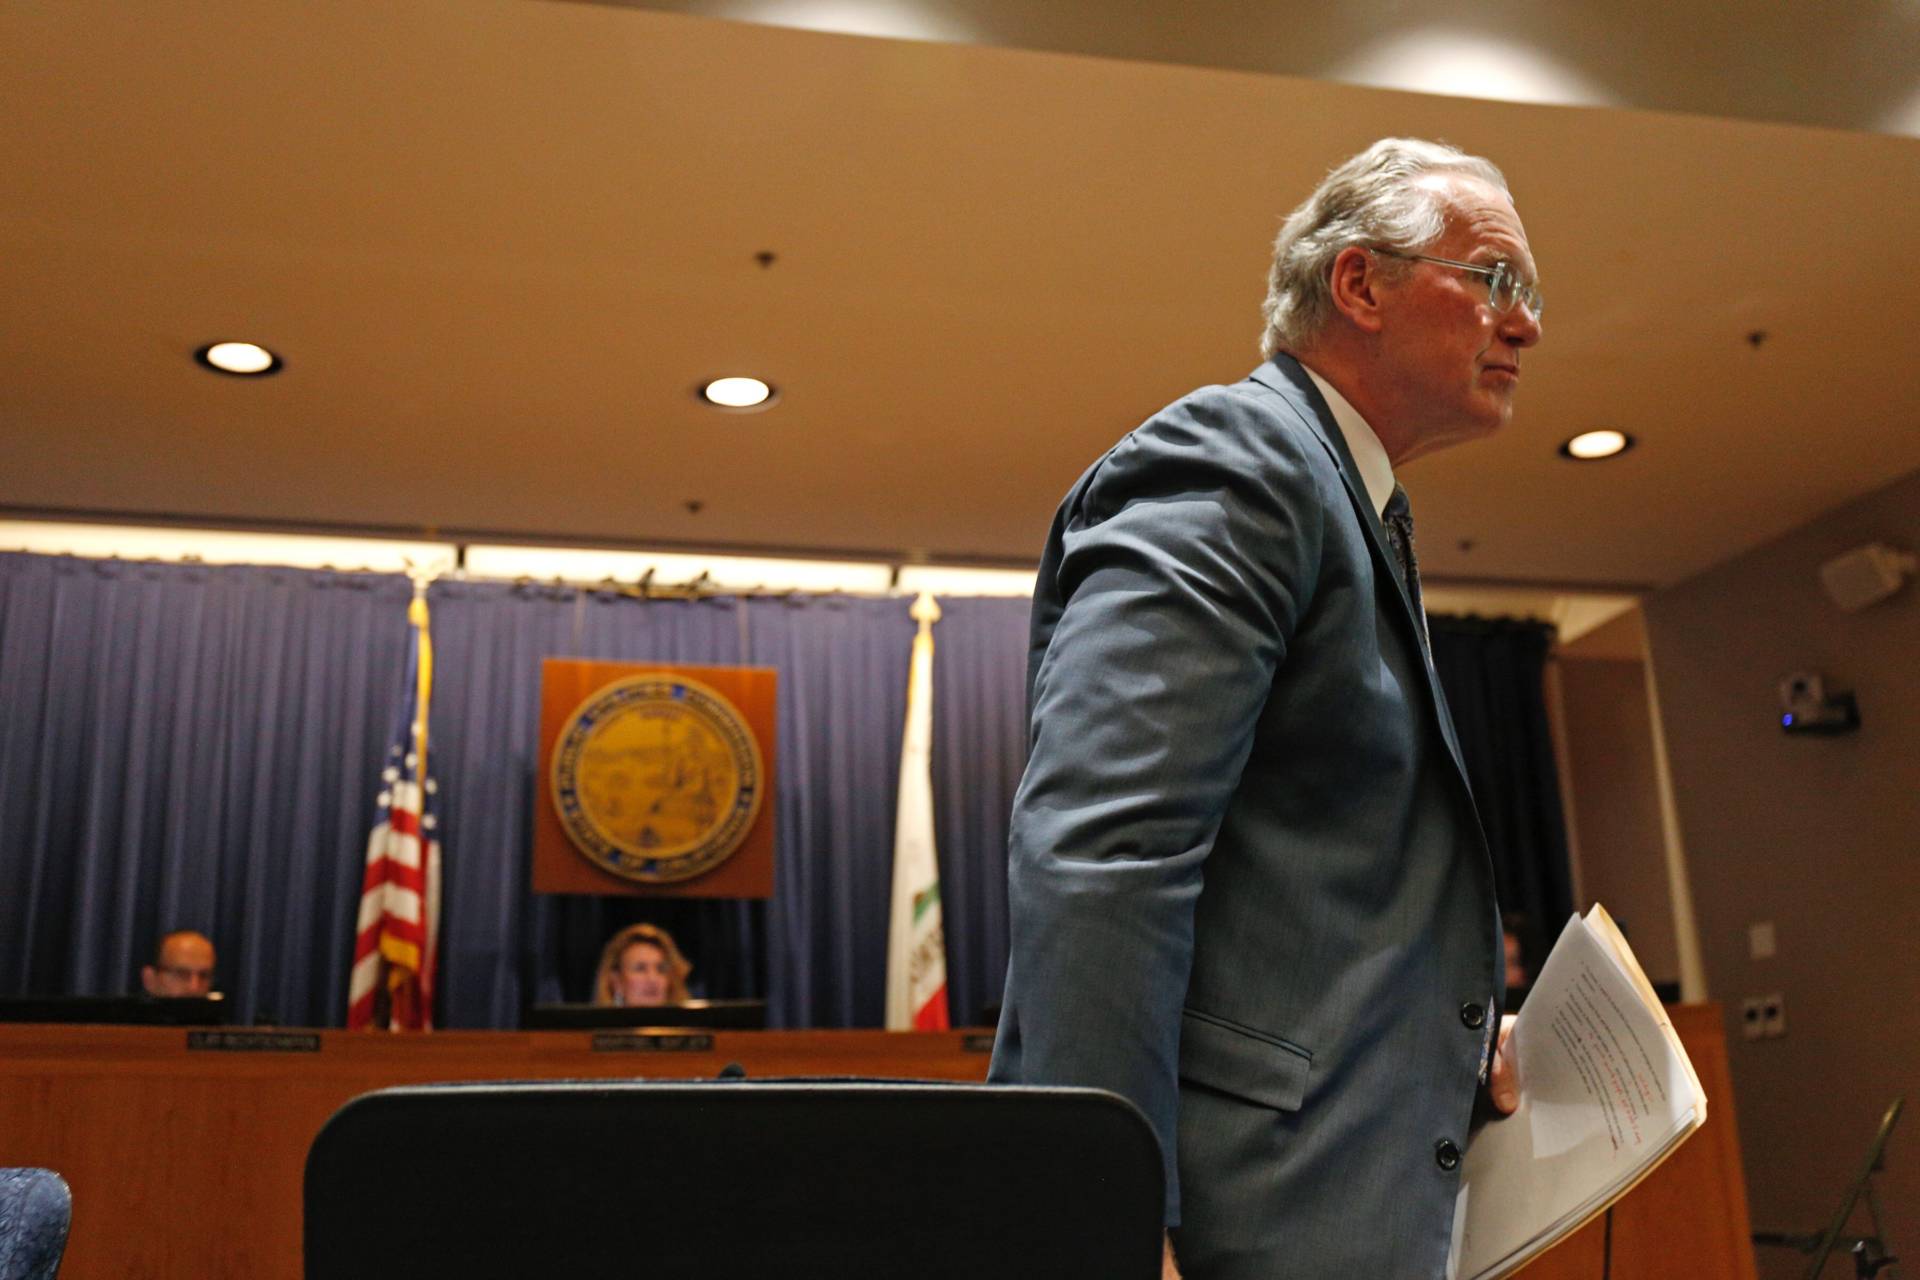 PG&E CEO Bill Johnson addressed the utility's widespread power shutoffs at an emergency meeting of the California Public Utilities Commission on Oct. 18, 2019.